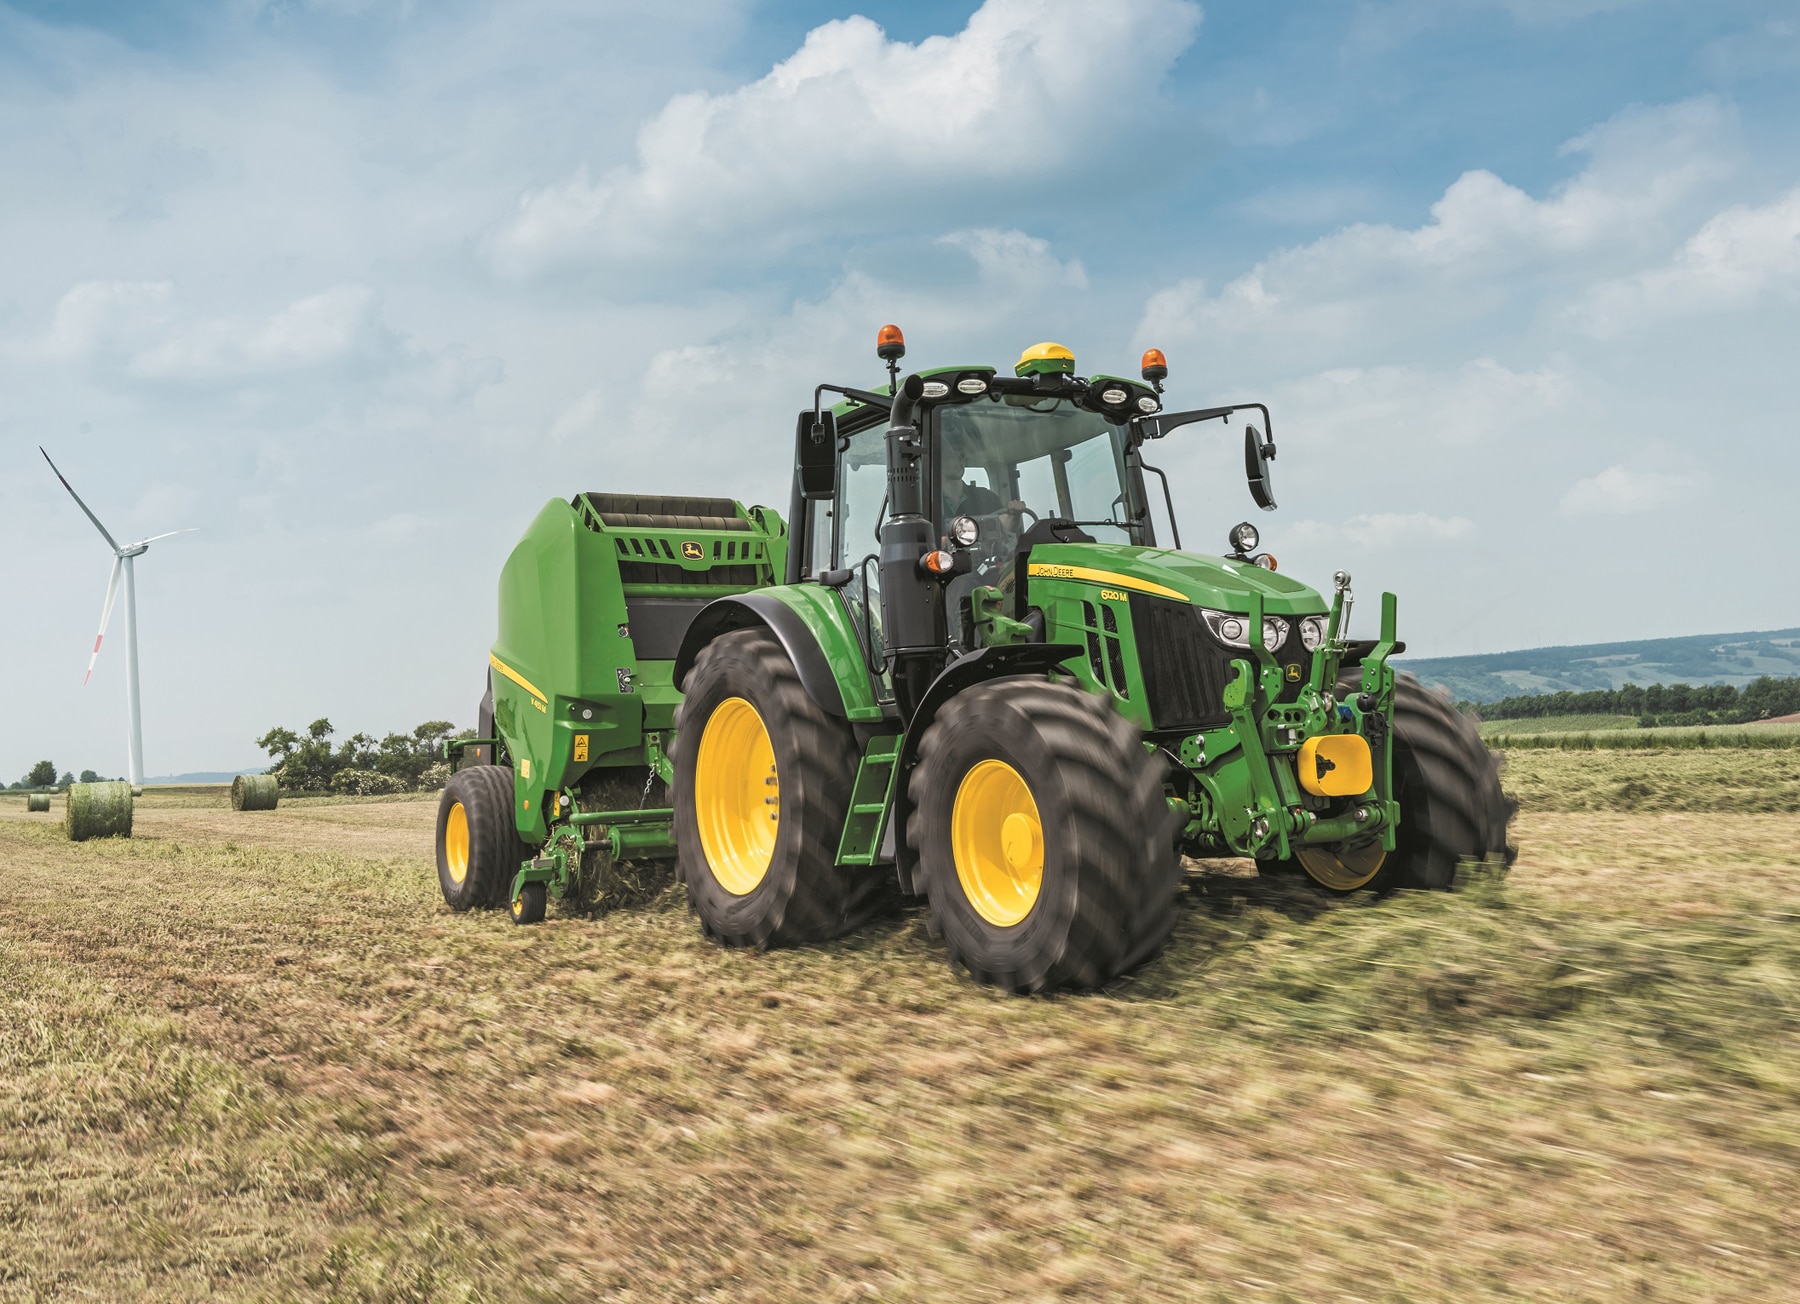 The John Deere 6120M is No.1 in the Best Utility Tractor category.